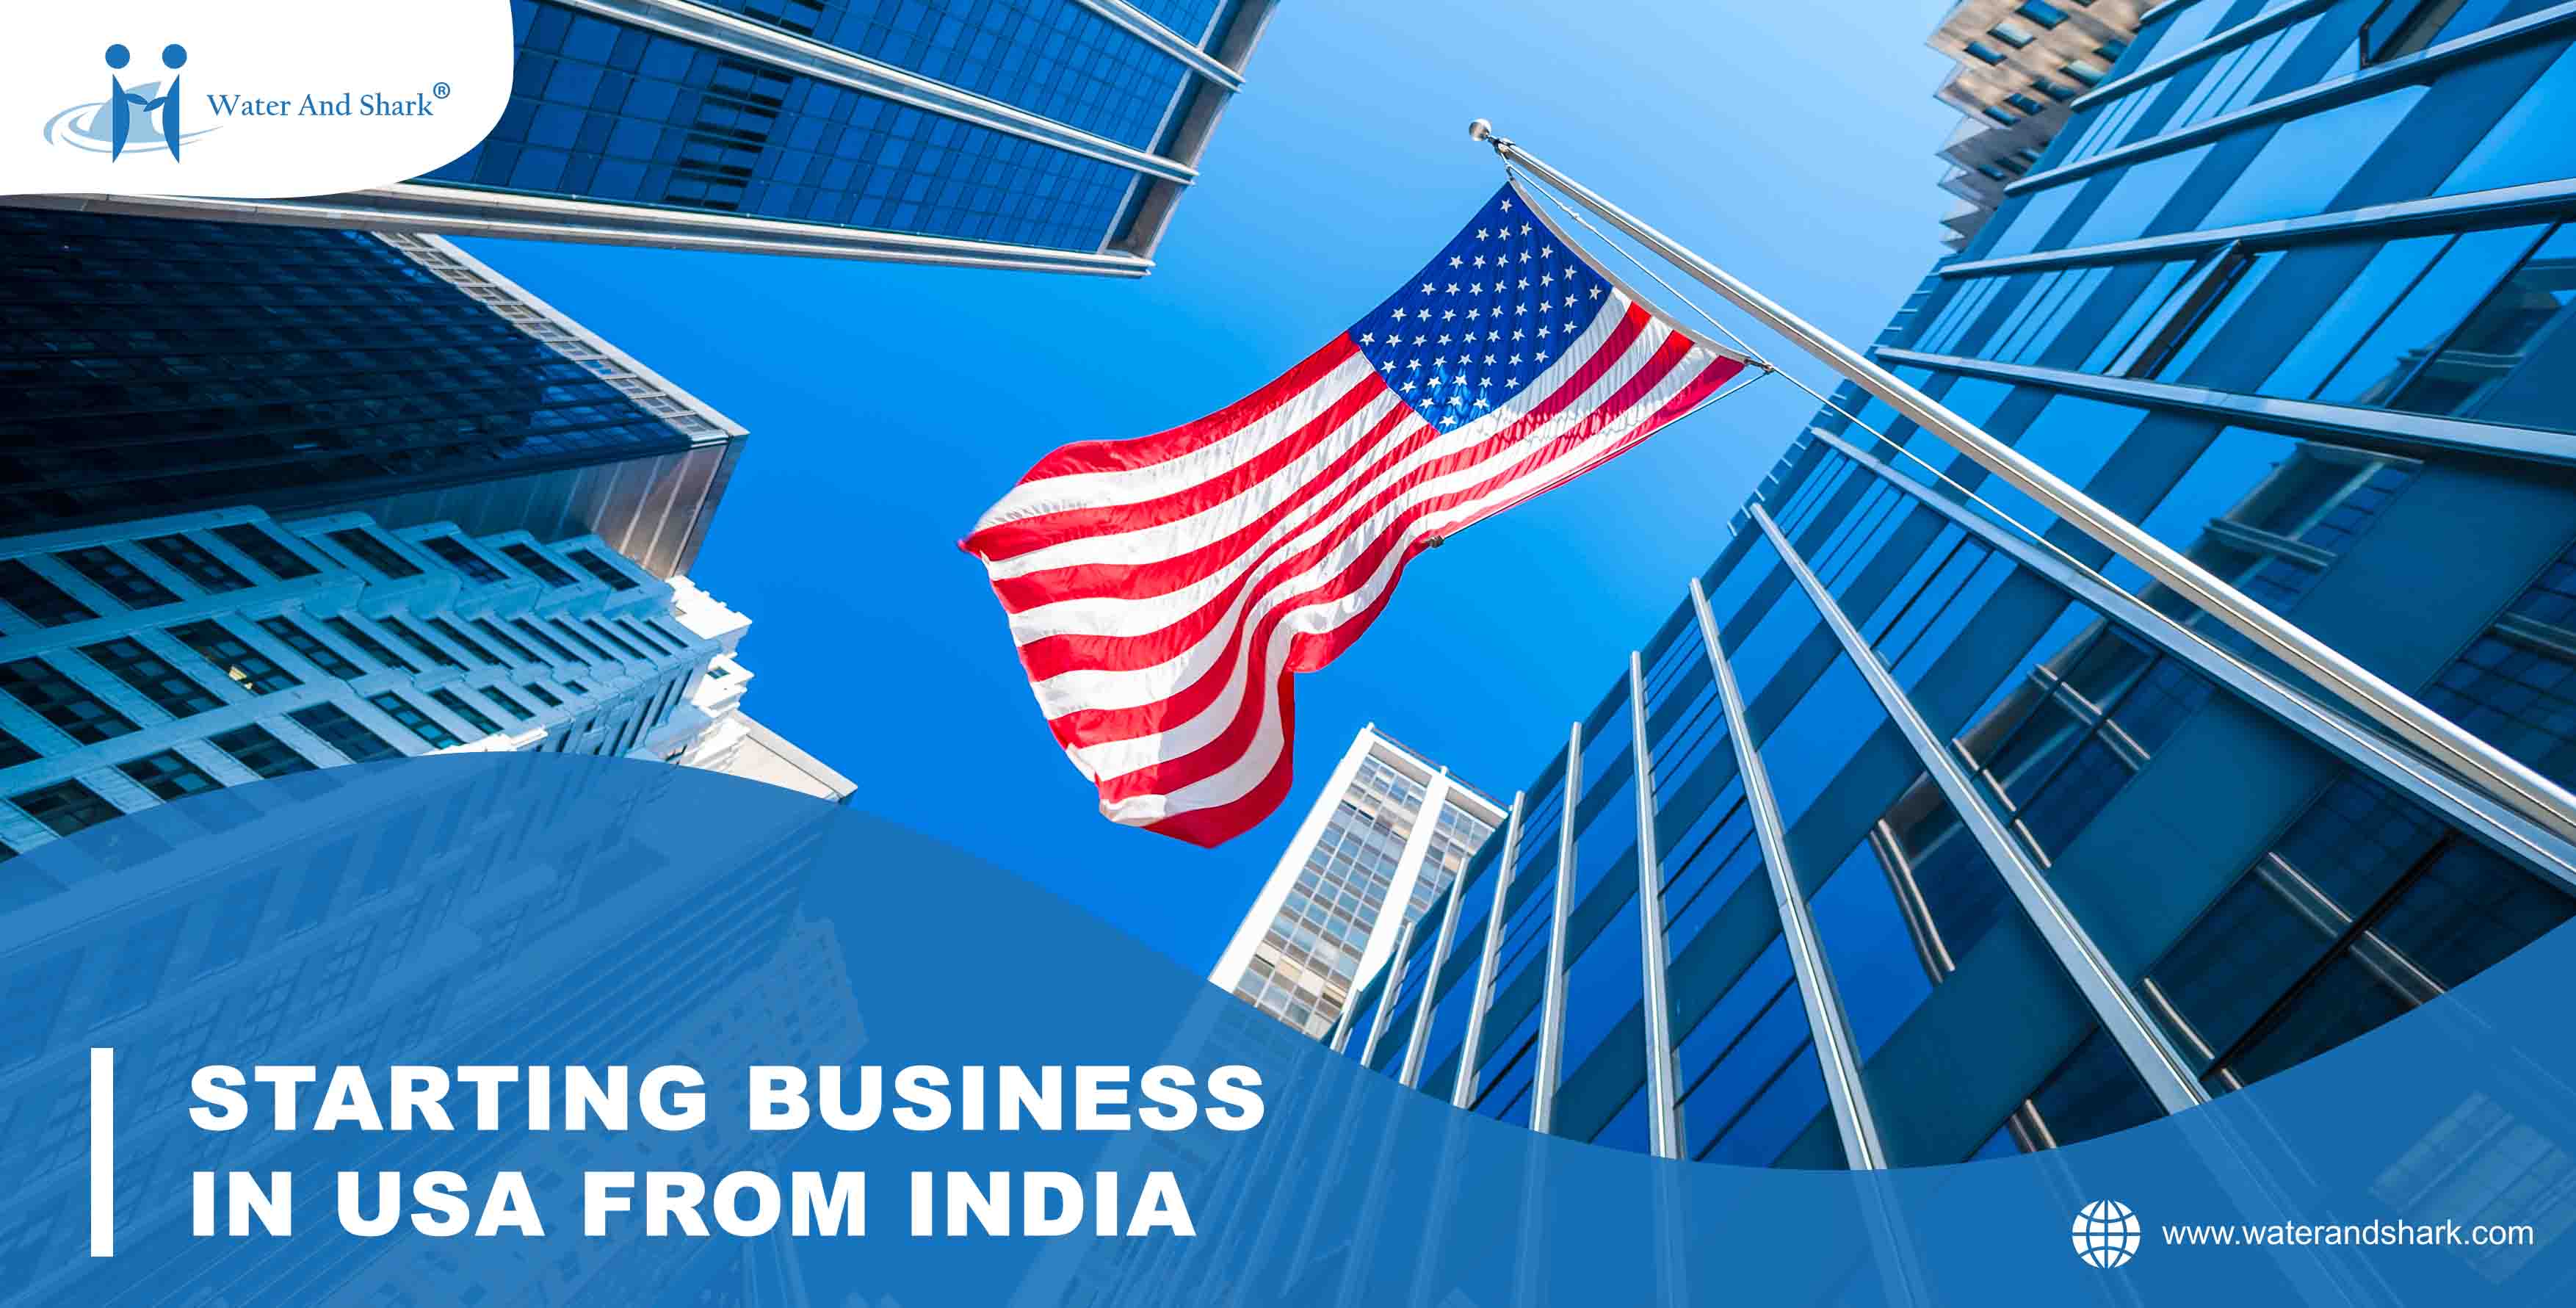 650x1280_STARTING_BUSINESS_IN_USA_FROM_INDIA_low_size.jpg